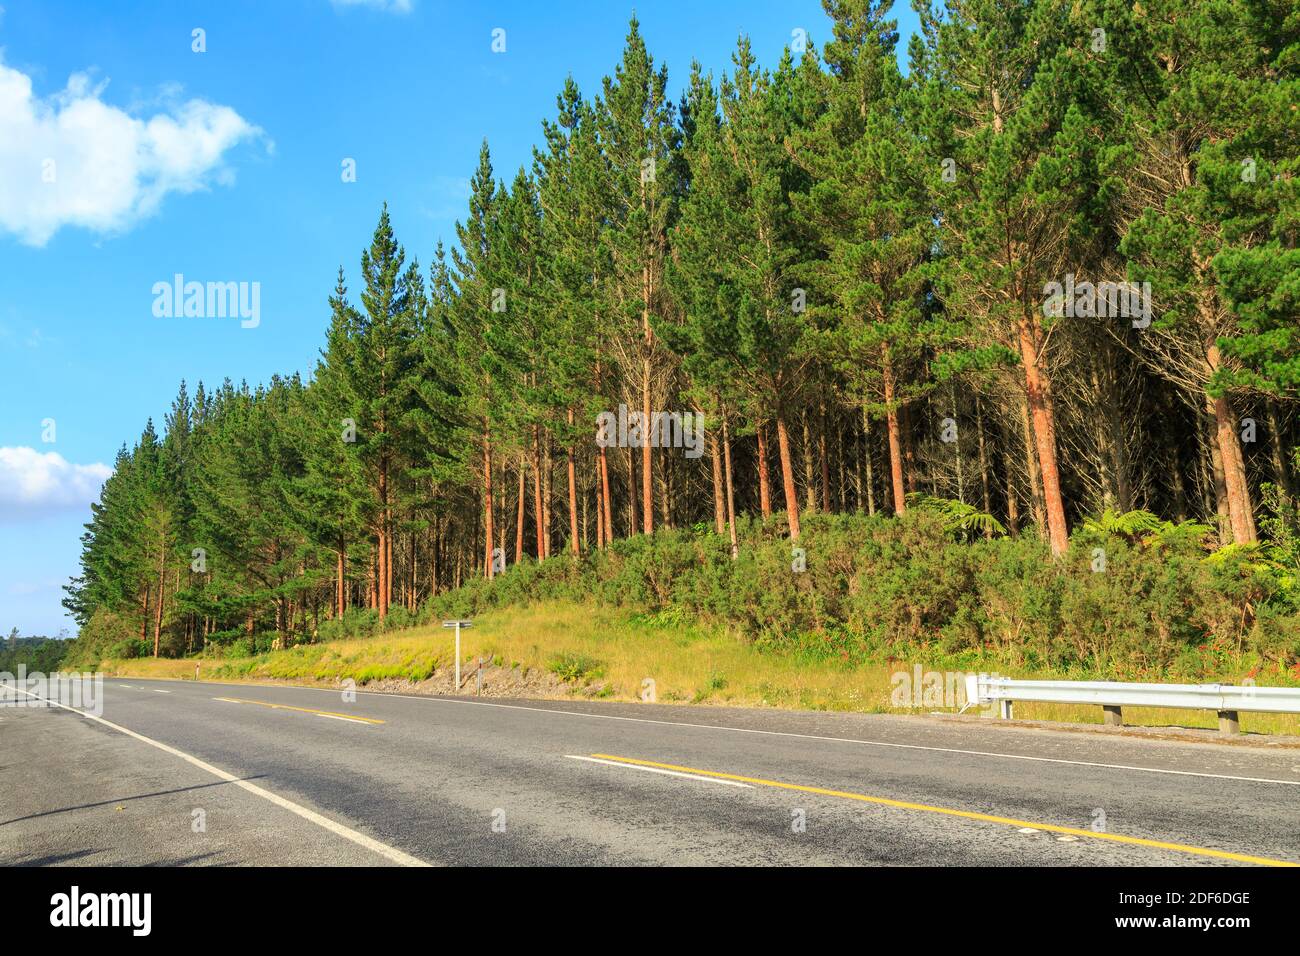 A plantation of pine trees (Pinus radiata) growing beside a road in New Zealand Stock Photo